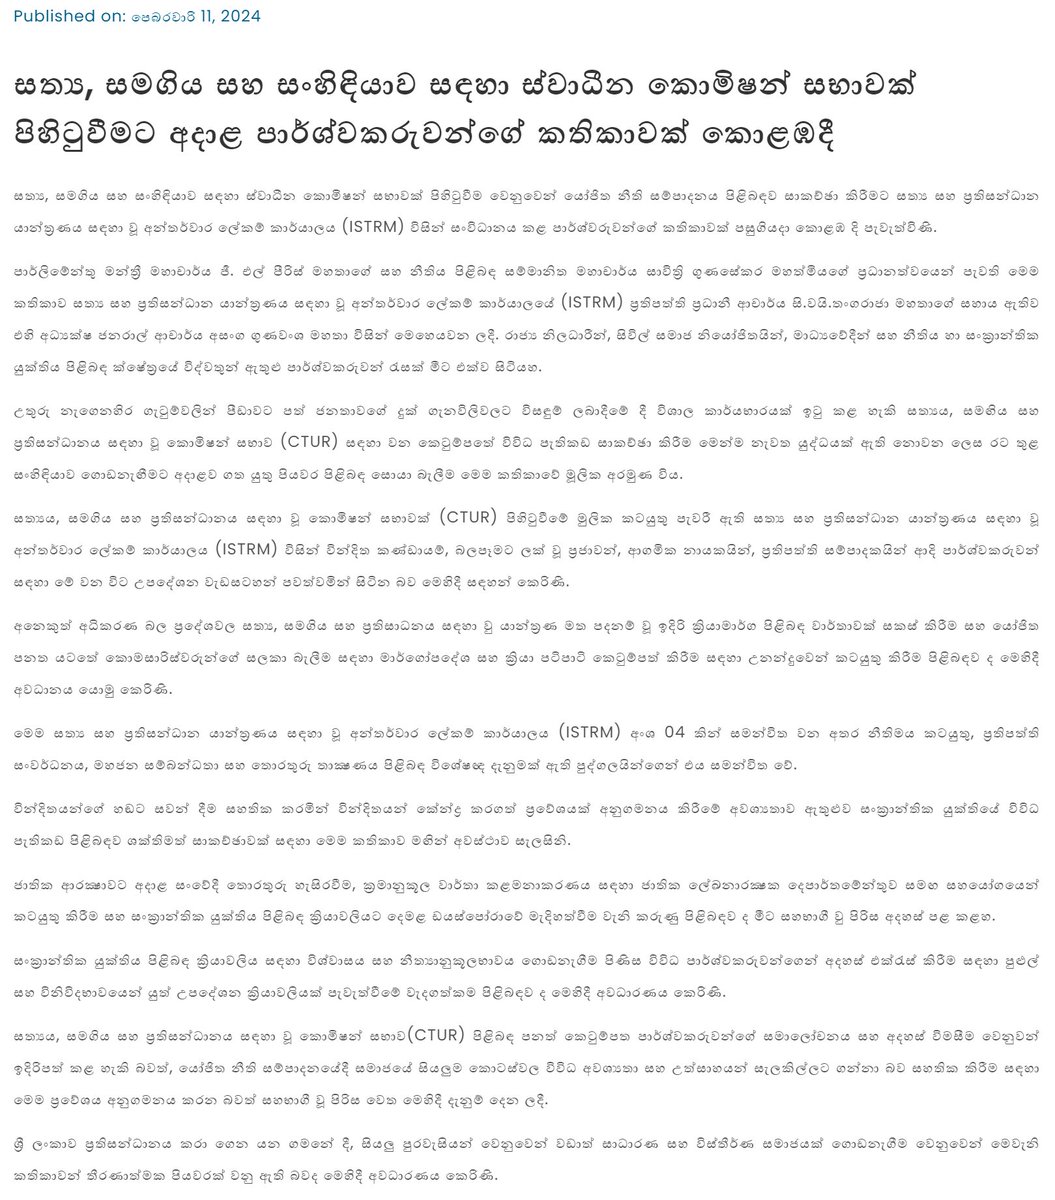 #SriLanka govt sets up new Interim Secretariat for the Truth and Reconciliation Mechanism (ISTRM) to discuss Commission for Truth, Unity & Reconciliation (CTUR), two weeks before #UNHRC55 meets in Geneva. Rajapaksa loyalist and SLPP Chairman Prof GL Peiris had led the discussion.